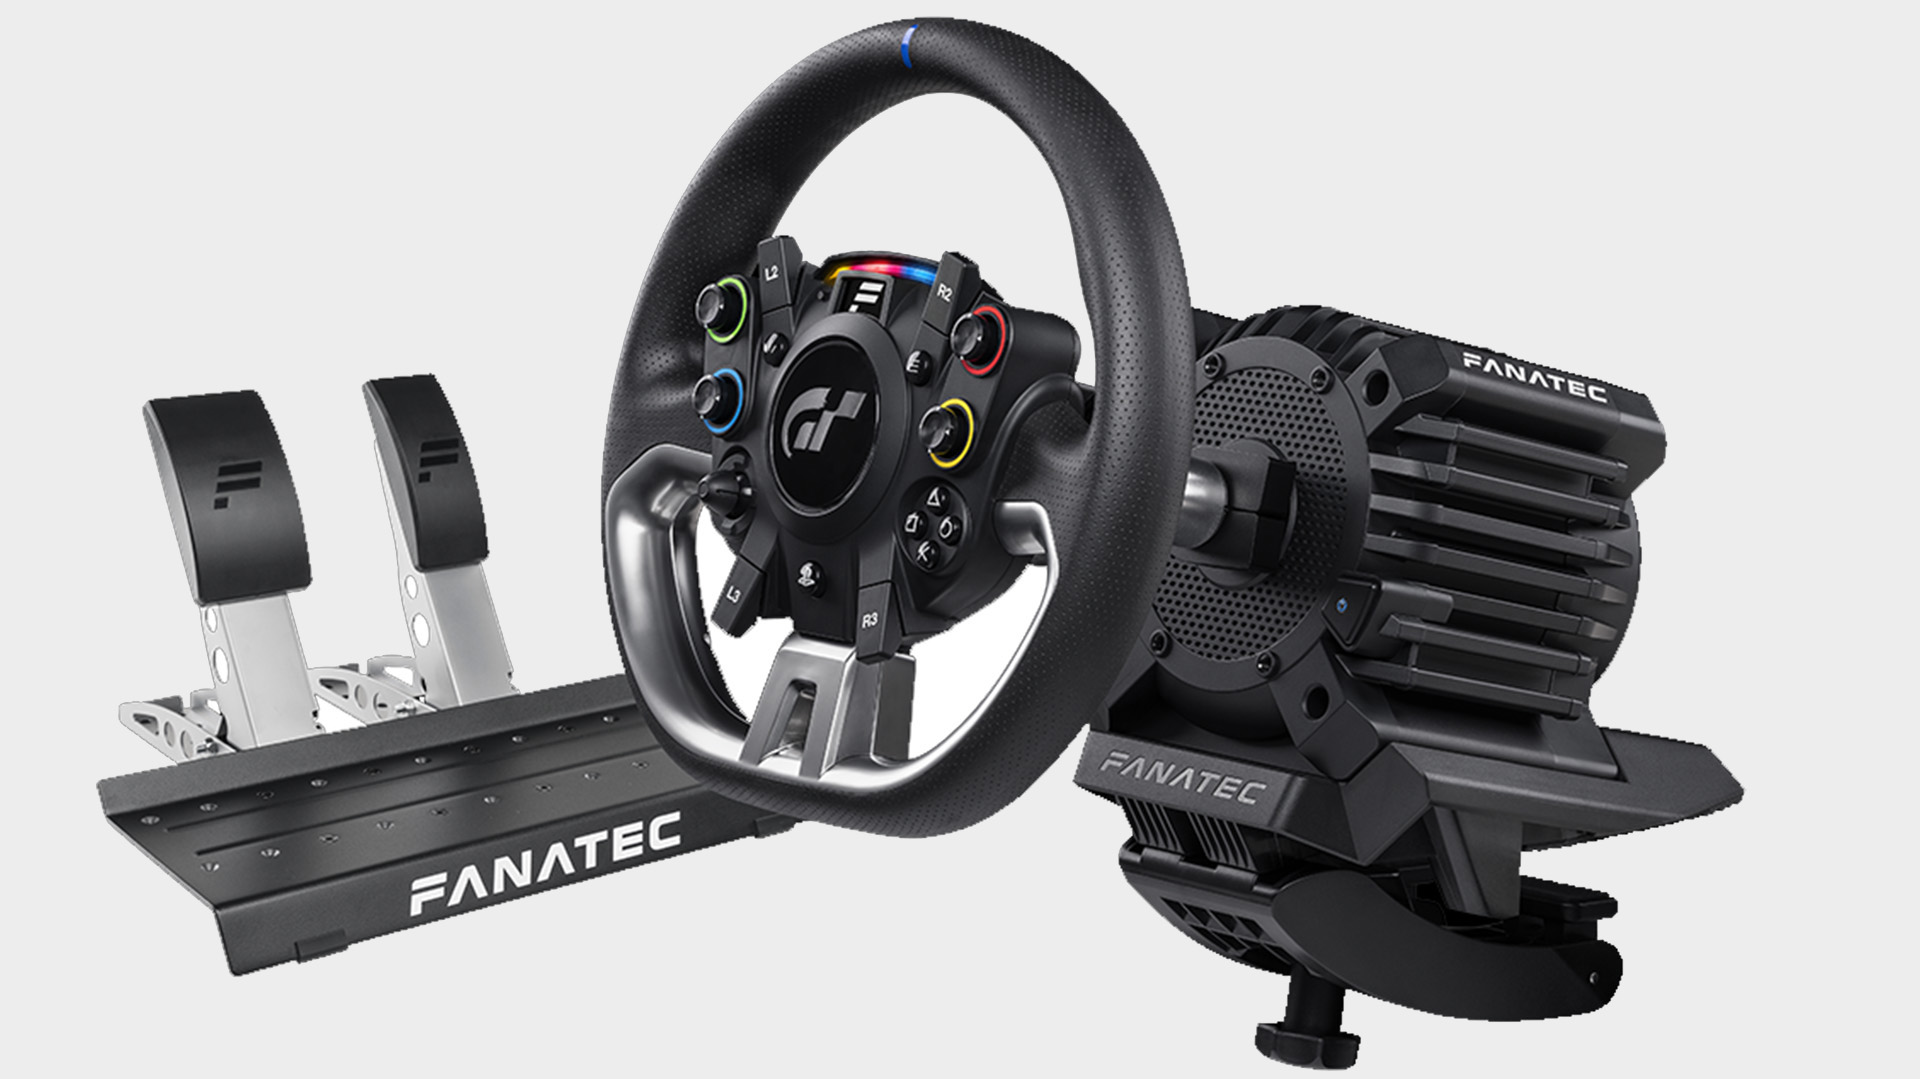 Fanatec GT DD Pro racing wheel and pedal set